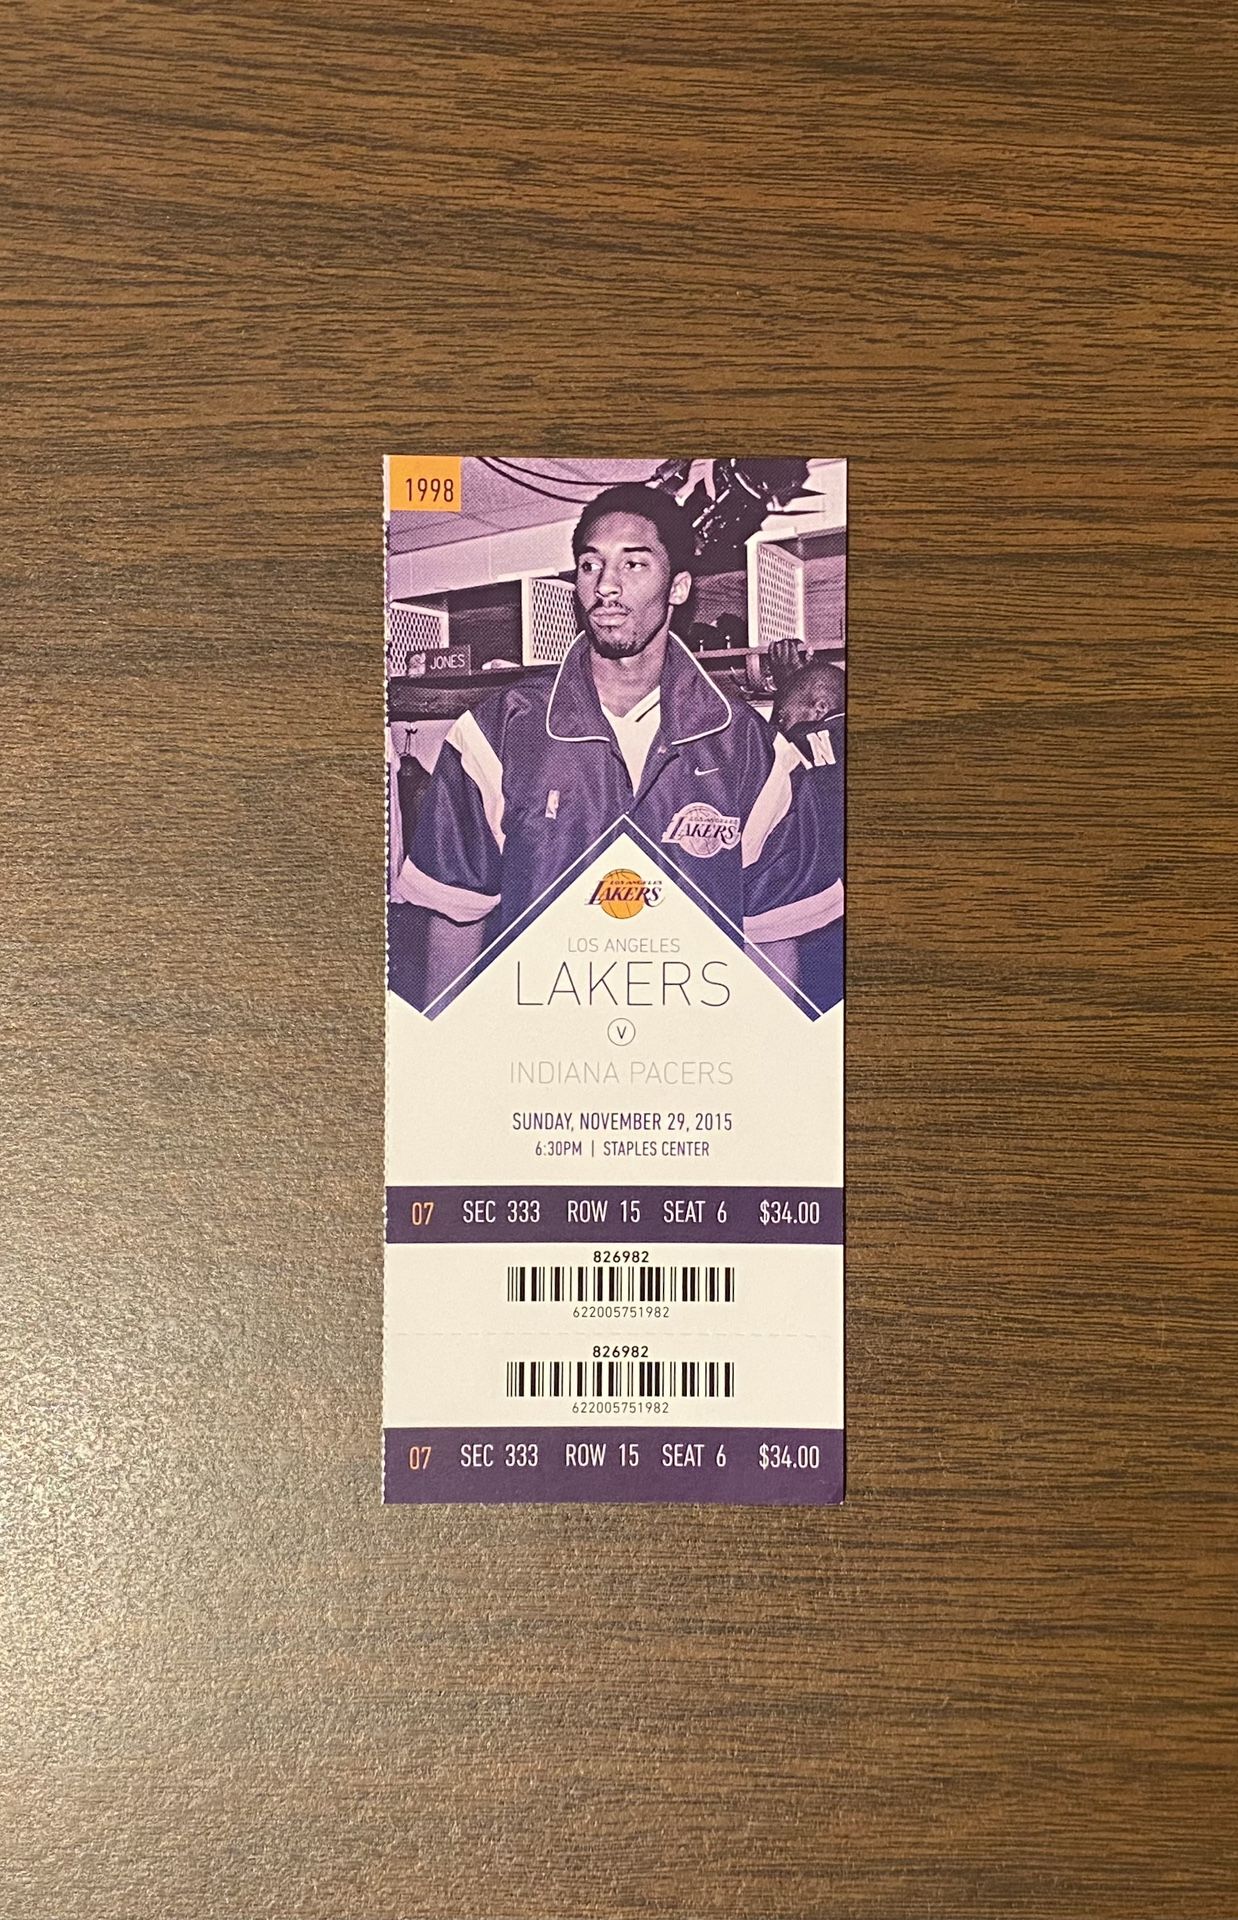 KOBE BRYANT ANNOUNCES RETIREMENT 2015 NBA AUTHENTIC FULL GAME TICKET 11/29/2015 LOS ANGELES LAKERS vs INDIANA PACERS “BLACK MAMBA”